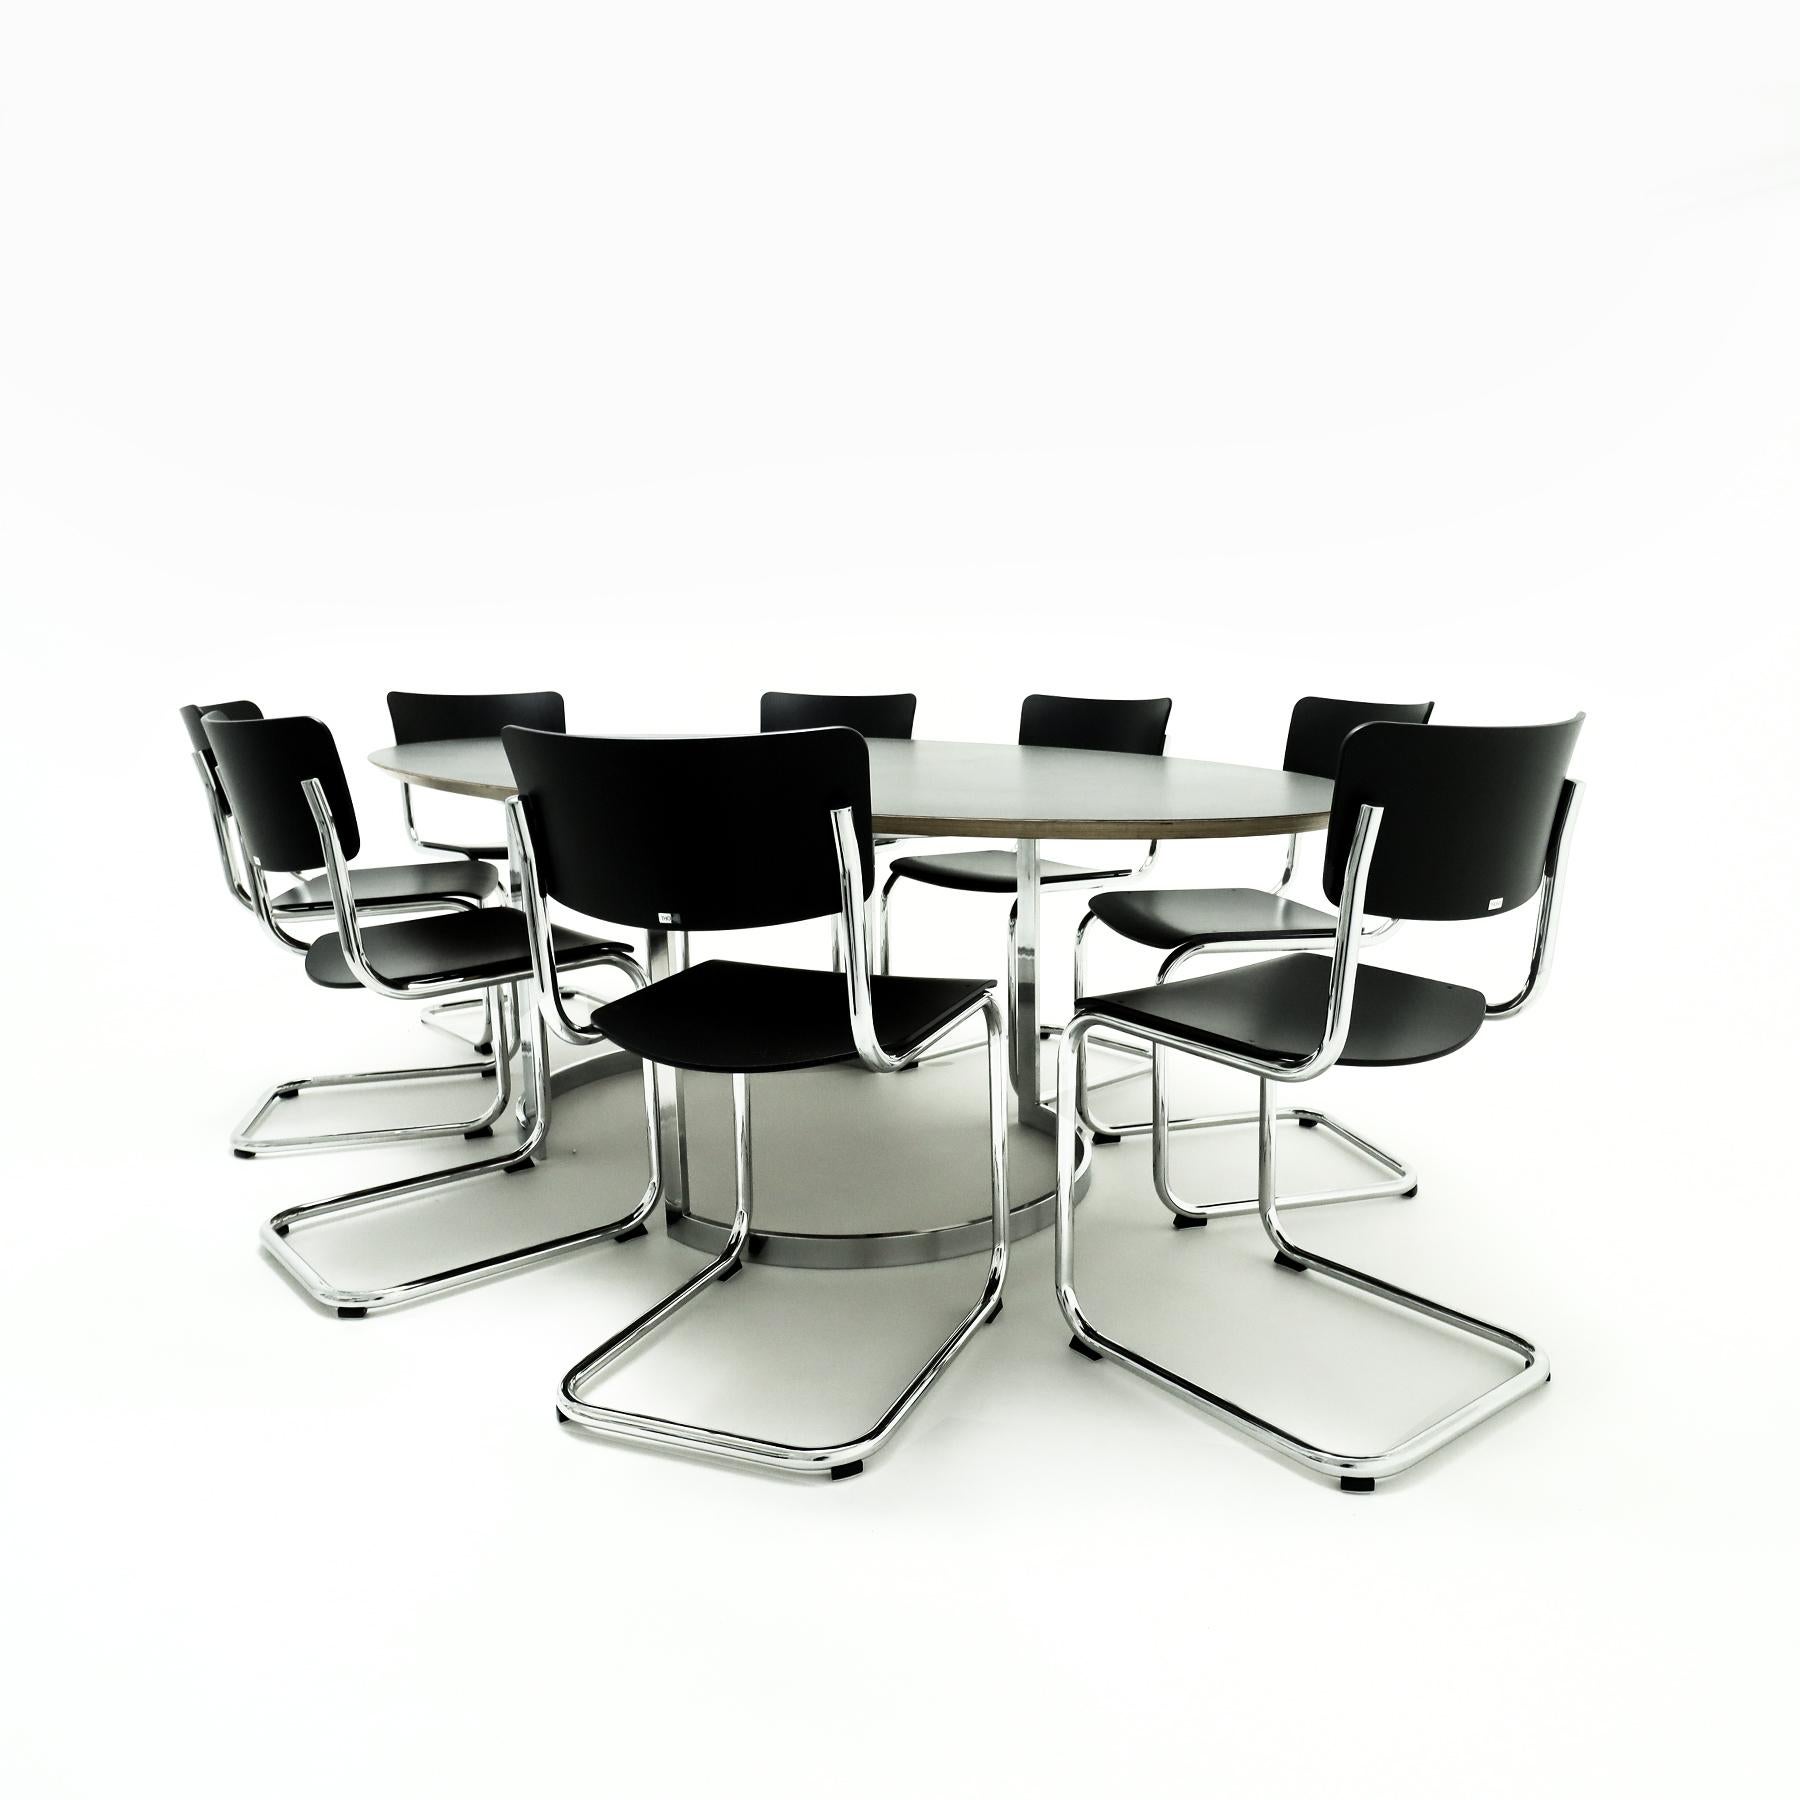 Bauhaus 8 Mart Stam Thonet S43 chairs matched to a large Milo Baughman style table  